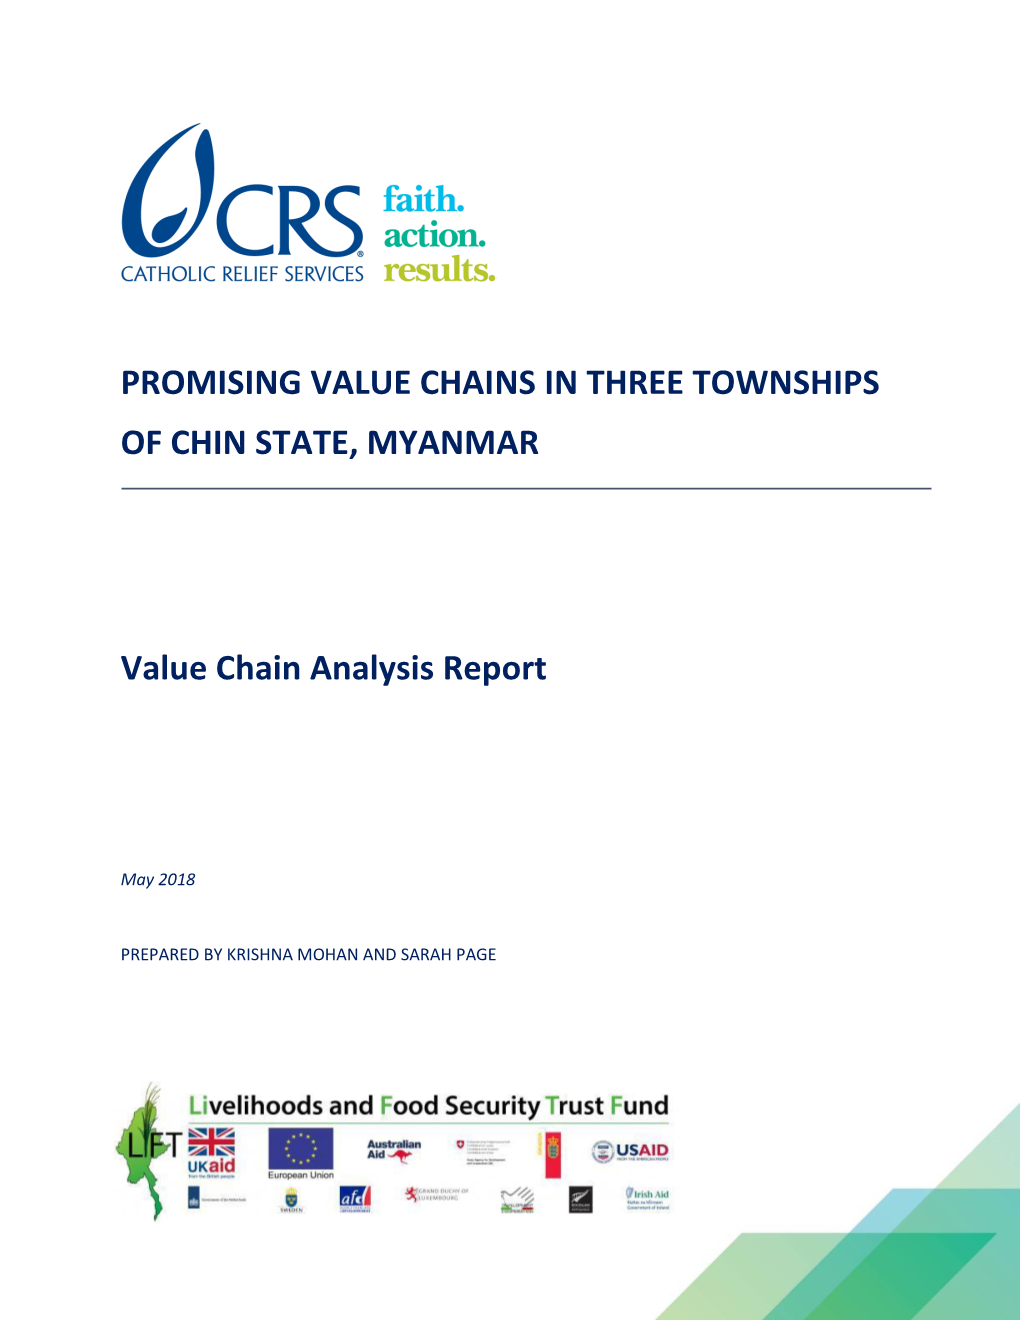 Promising Value Chains in Three Townships of Chin State, Myanmar